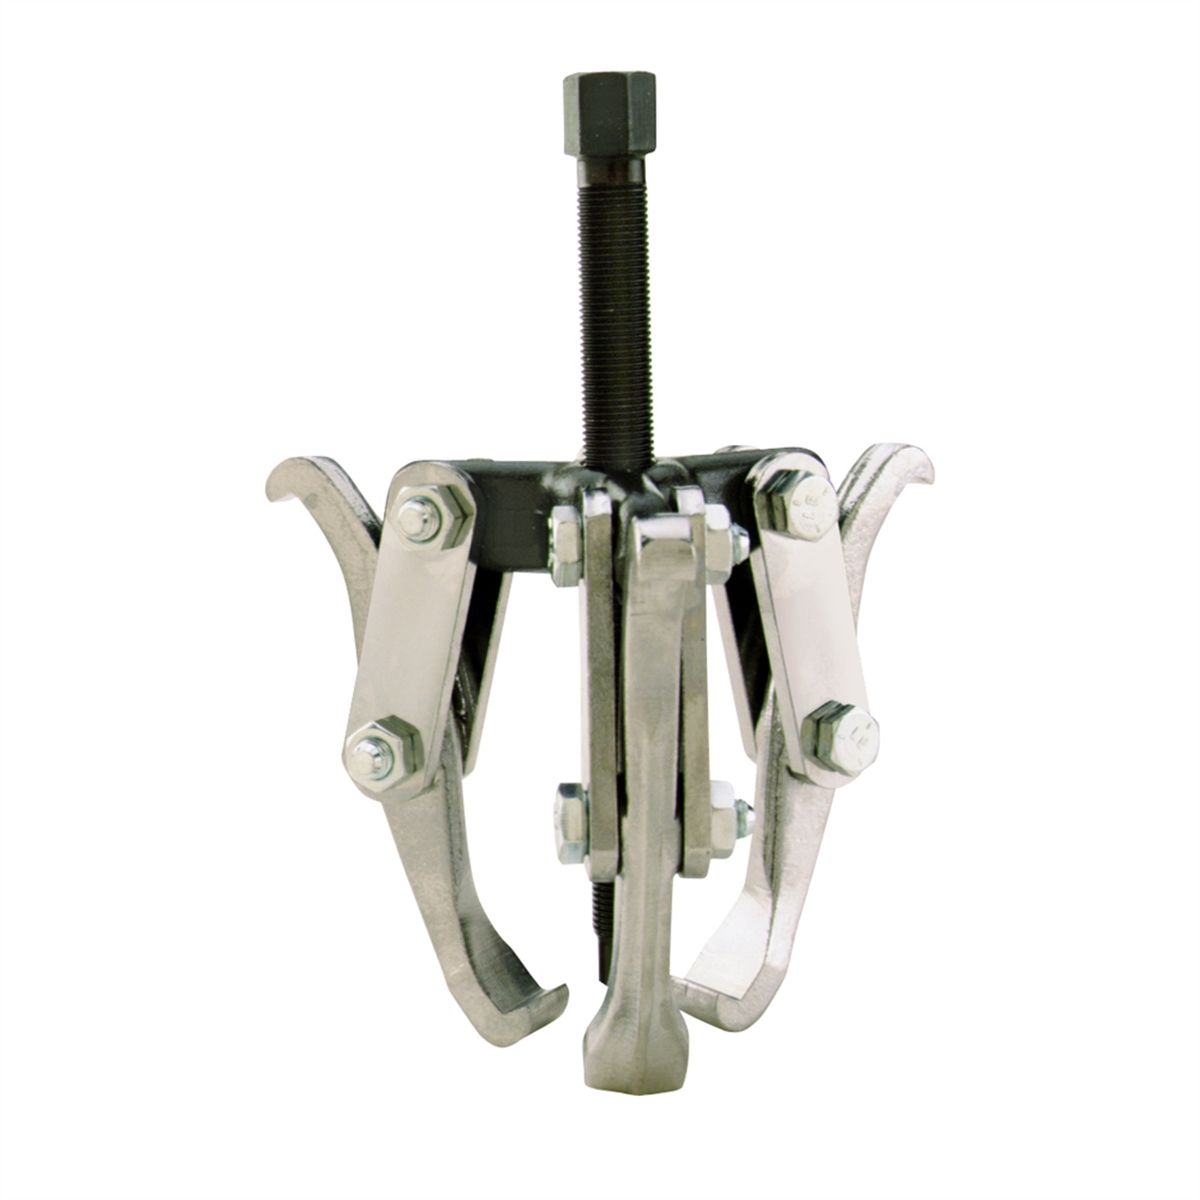 Mechanical Grip-O-Matic(R) Puller - 5 Ton Capacity, 2/3 Jaw,